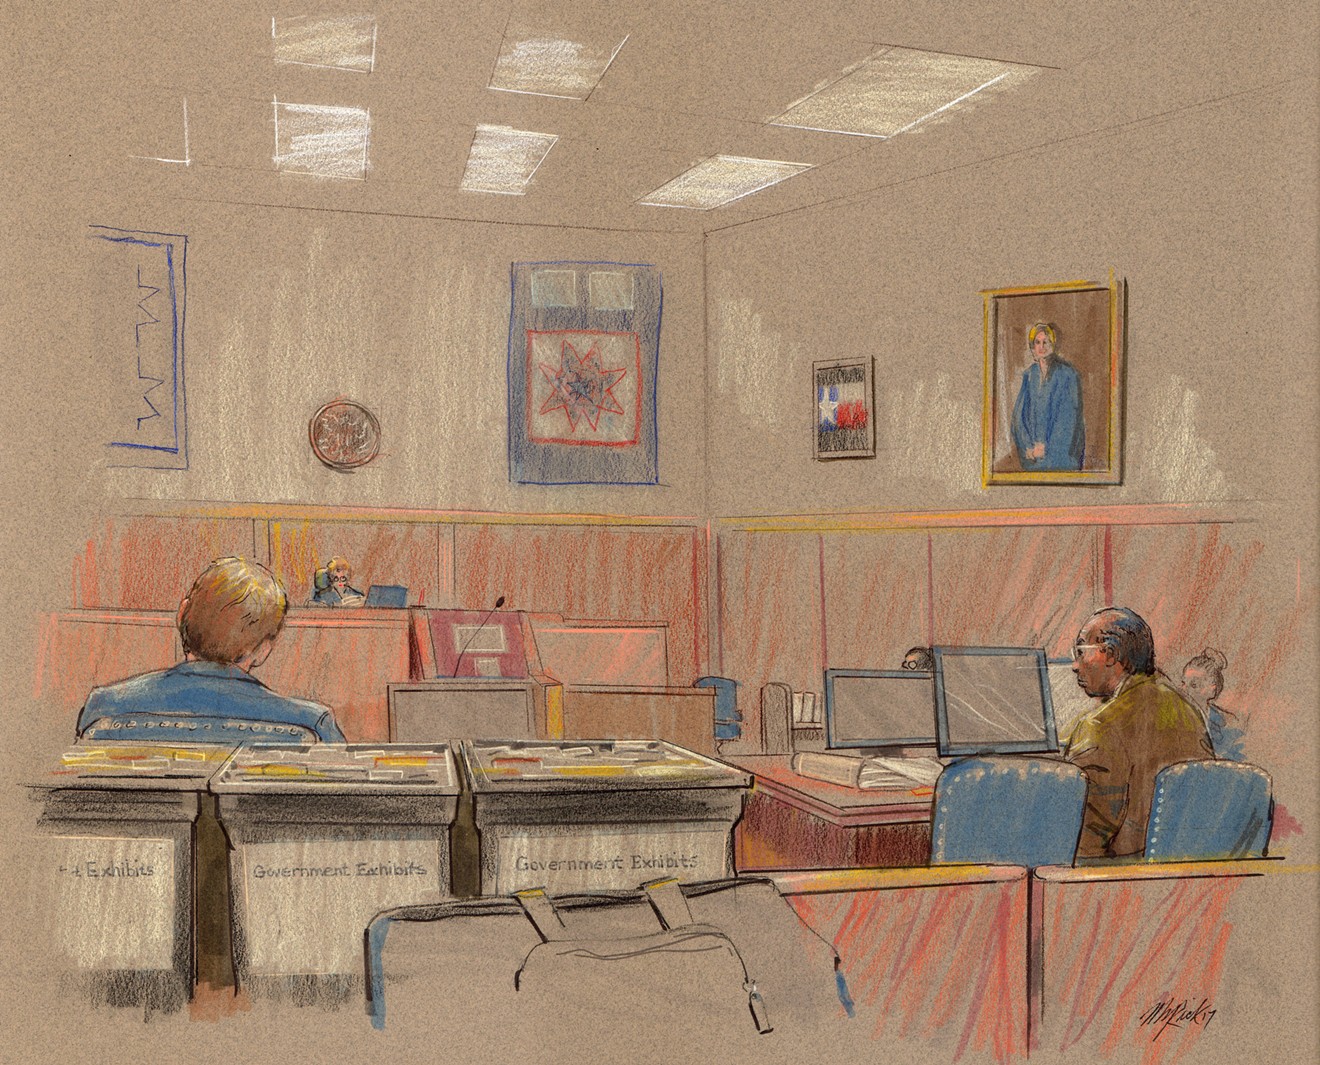 The scene from the courtroom.